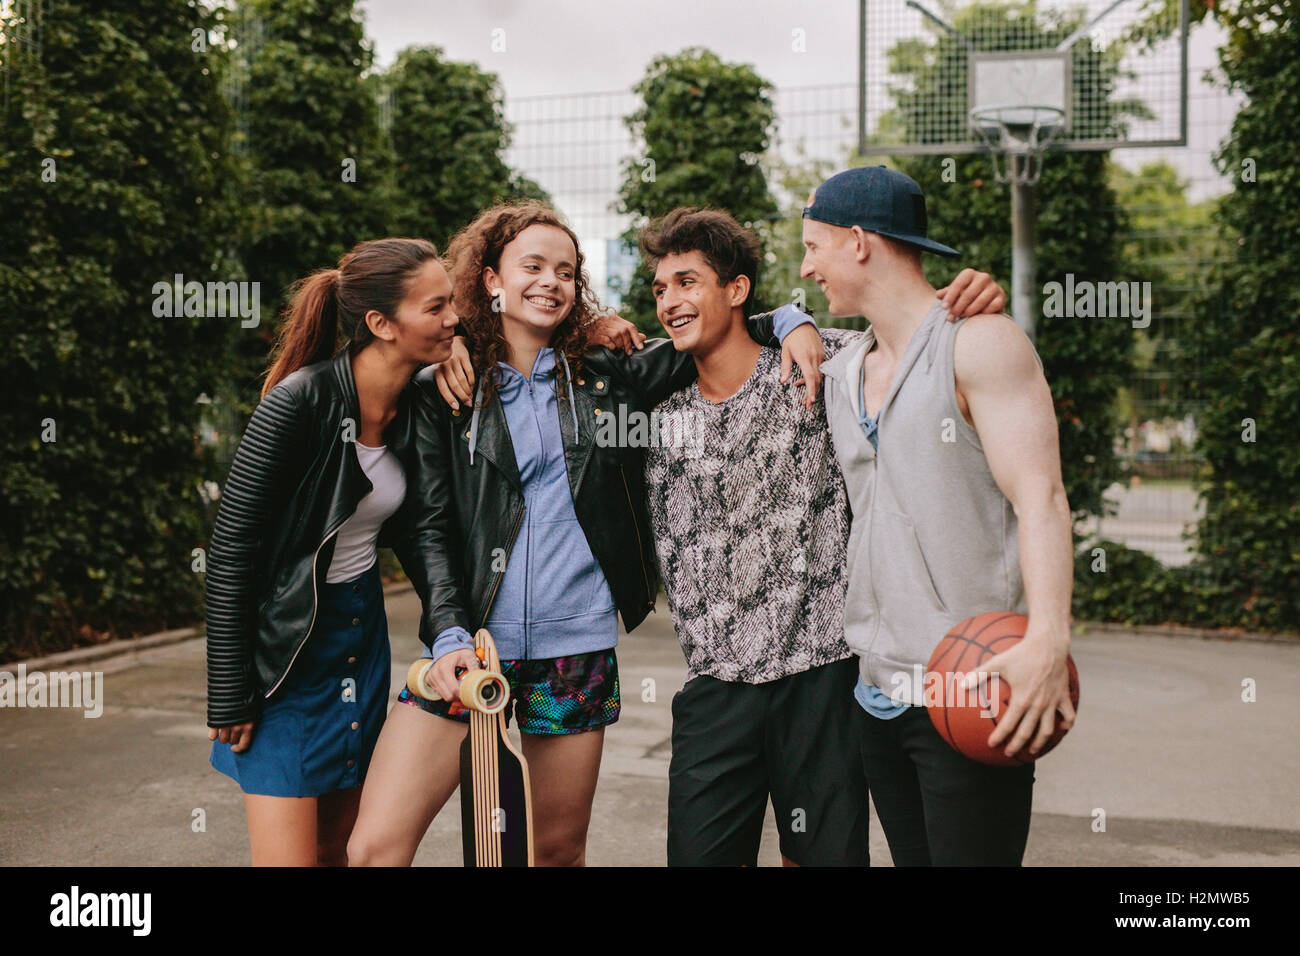 Portrait of four young friends standing together. Mixed race group of people having fun outdoors. Stock Photo